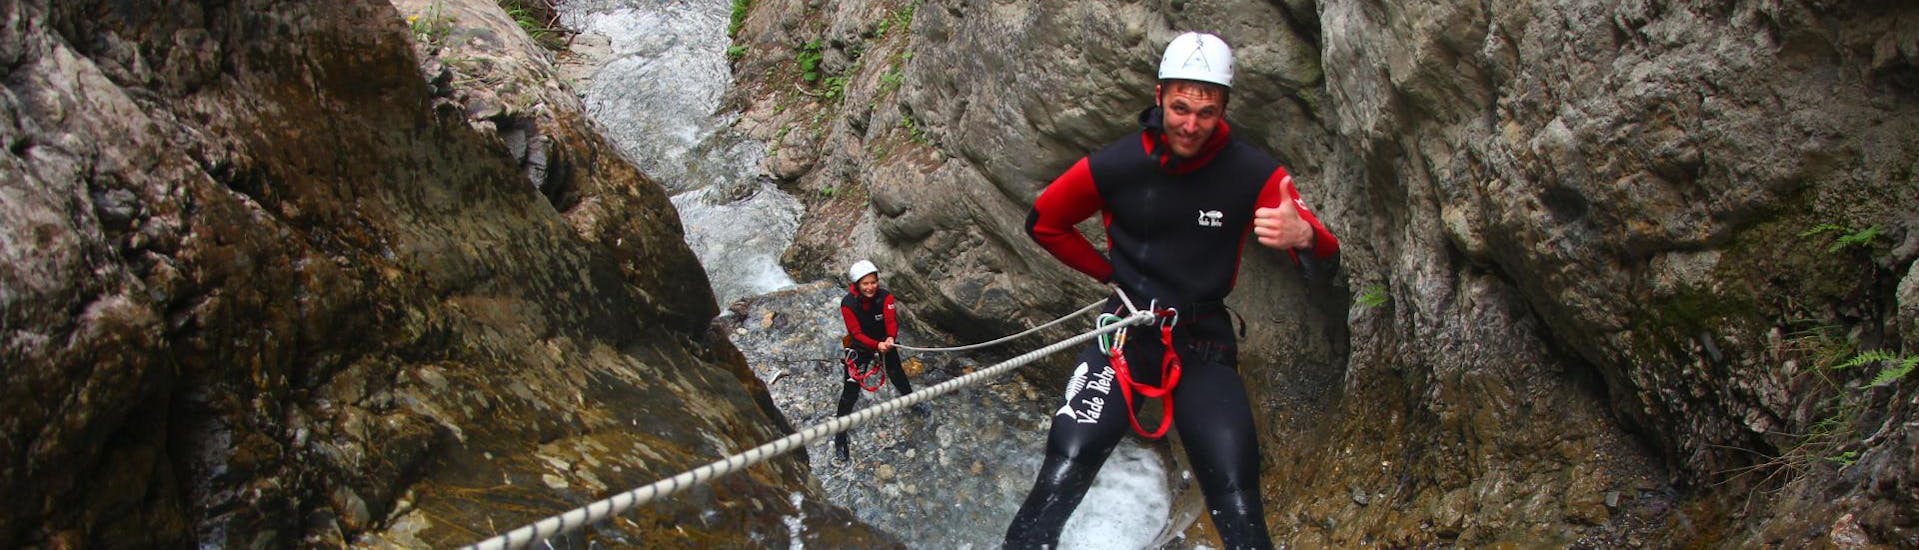 During the Canyoning "First Timer Tour" organised by WhyNot Adventures, a man is enjoying abseiling in the canyon Tschingels.